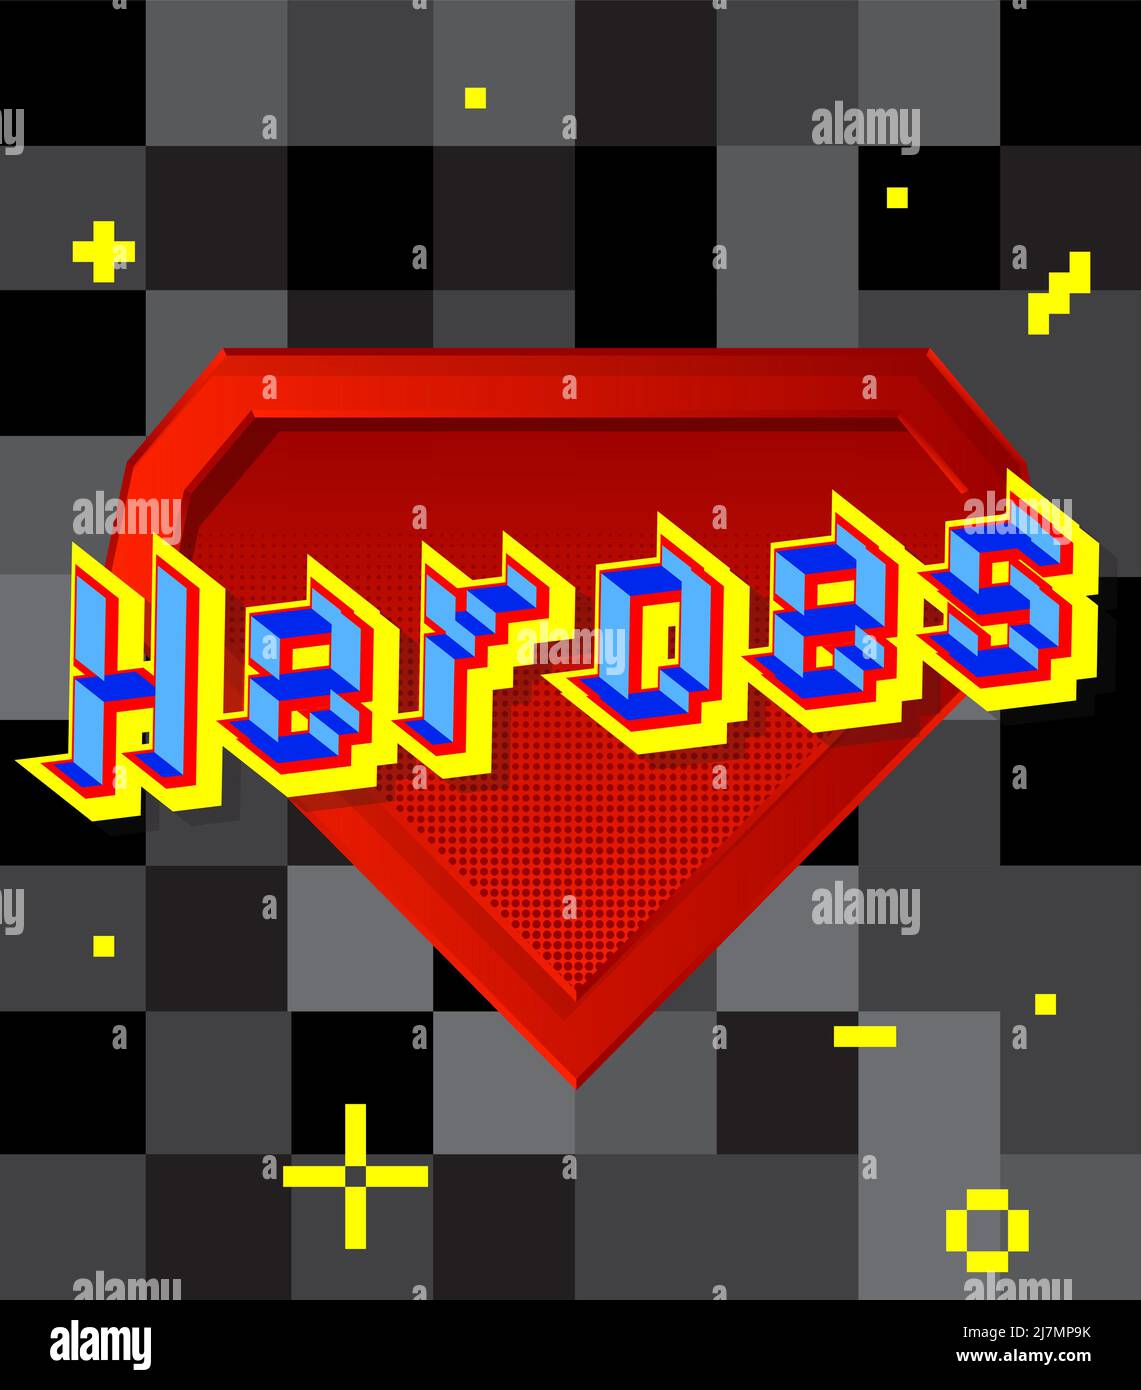 Heroes pixelated word with geometric graphic background. Vector cartoon illustration. Stock Vector